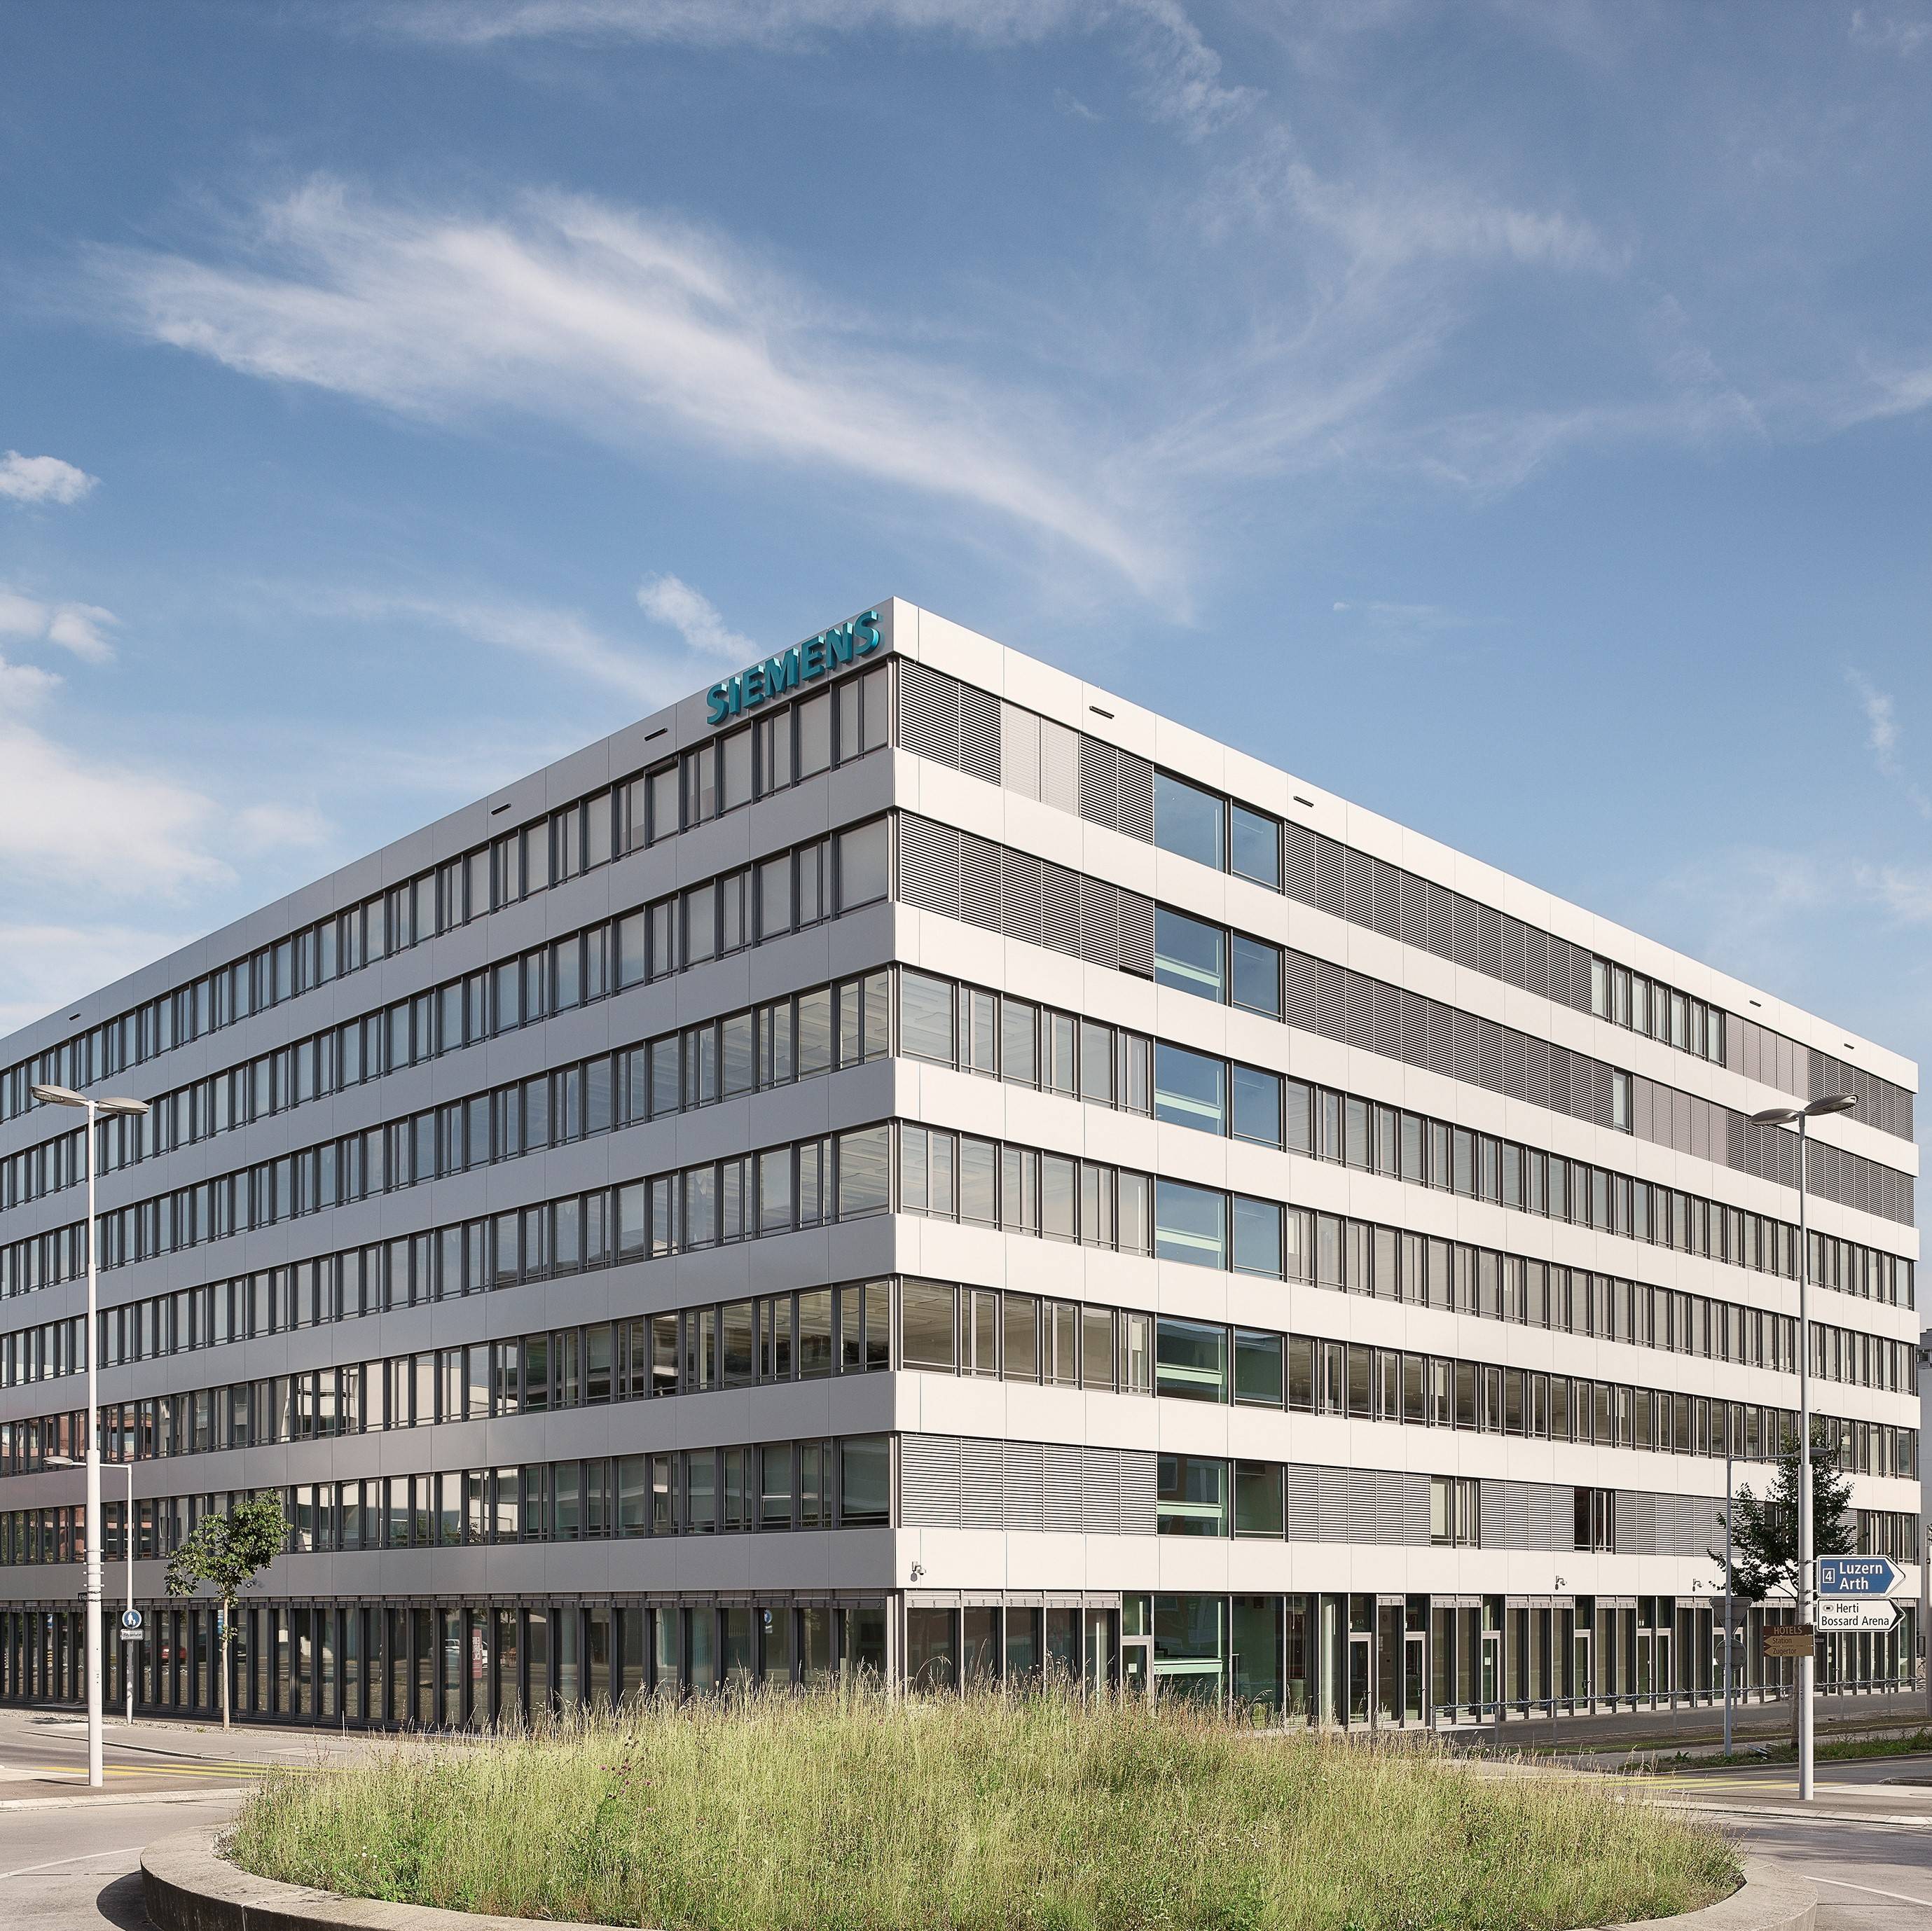 Siemens new Swiss campus showcases workplace technology and use of BIM in construction